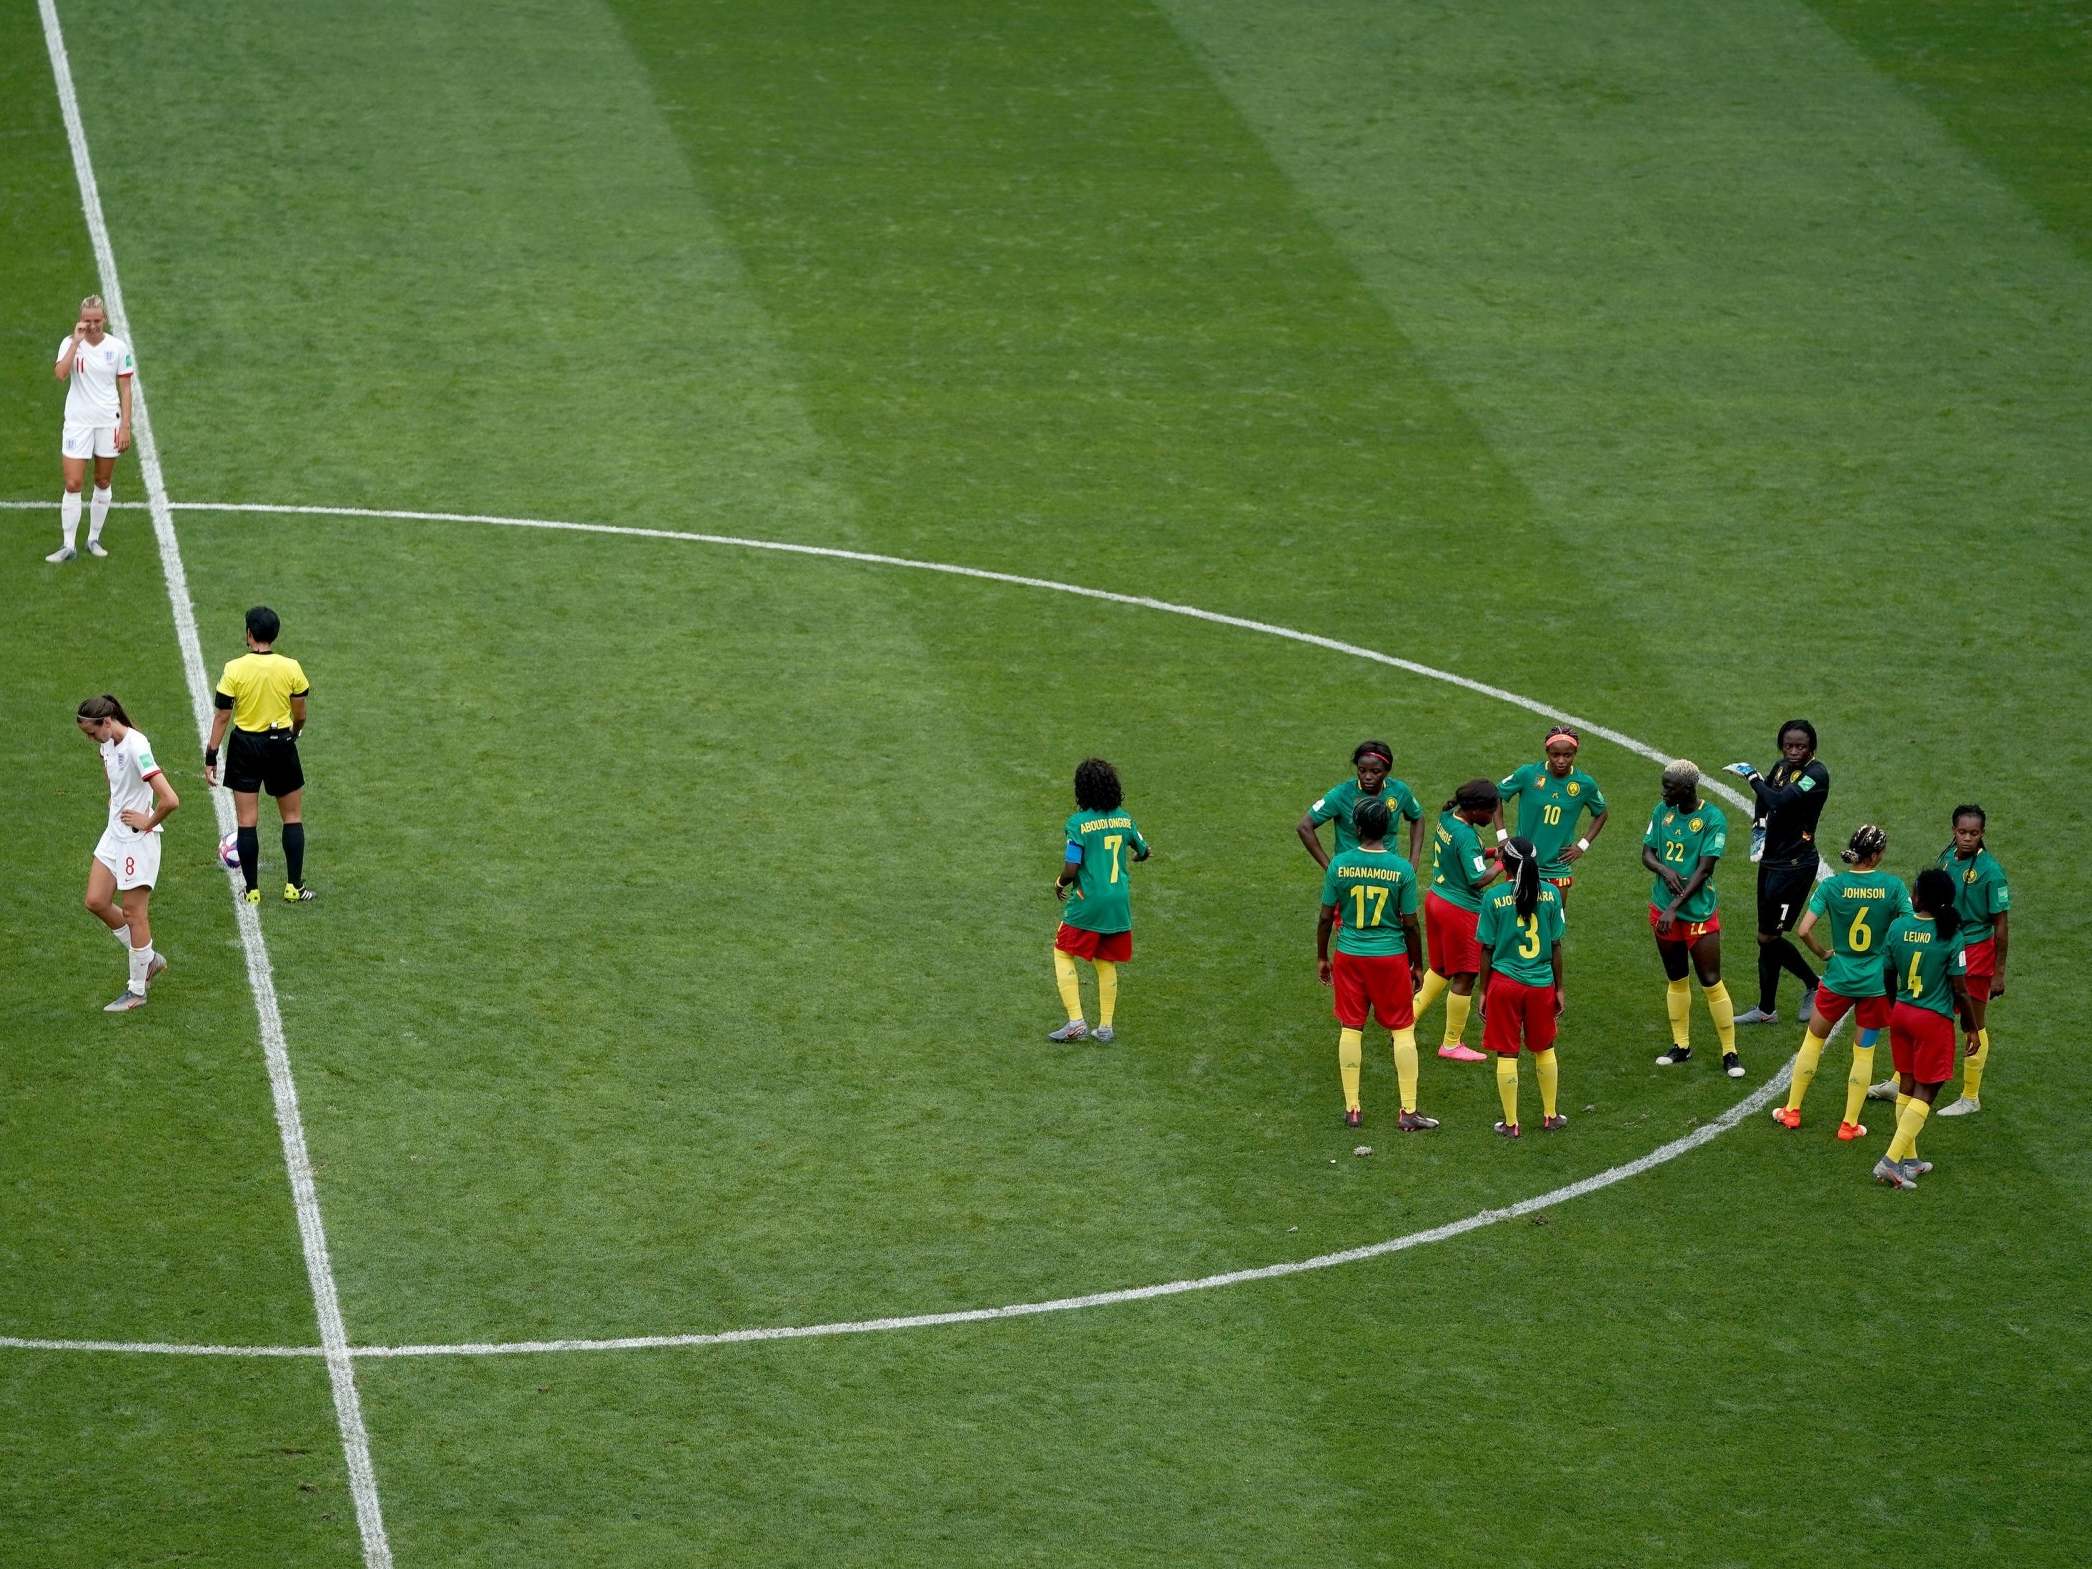 The Cameroon players refused to kick-off after White's goal was allowed